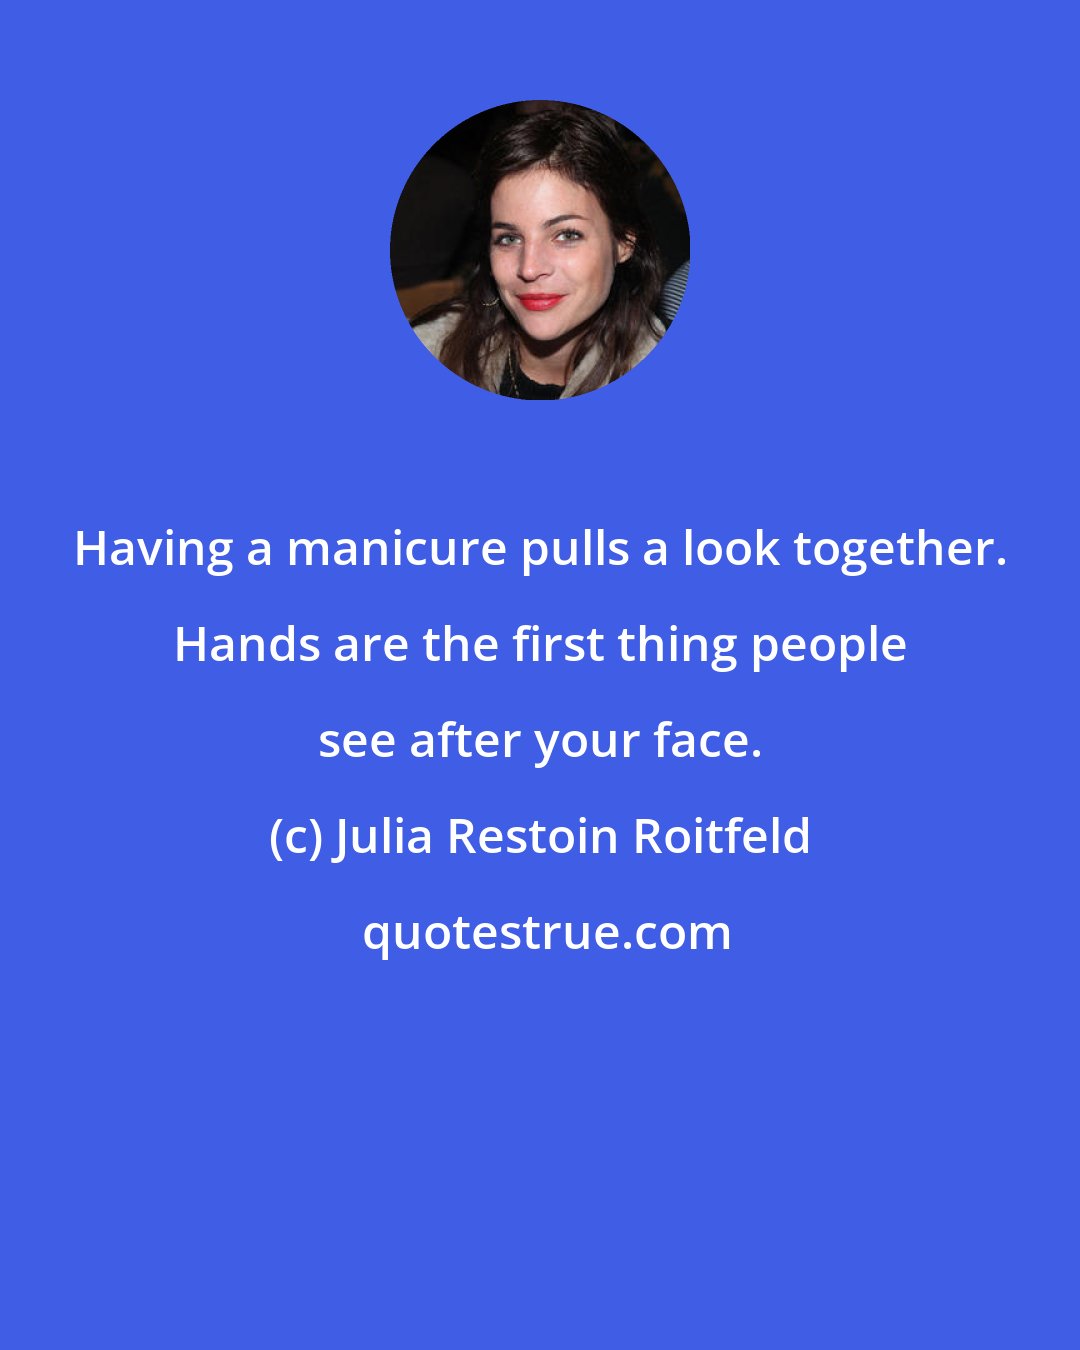 Julia Restoin Roitfeld: Having a manicure pulls a look together. Hands are the first thing people see after your face.